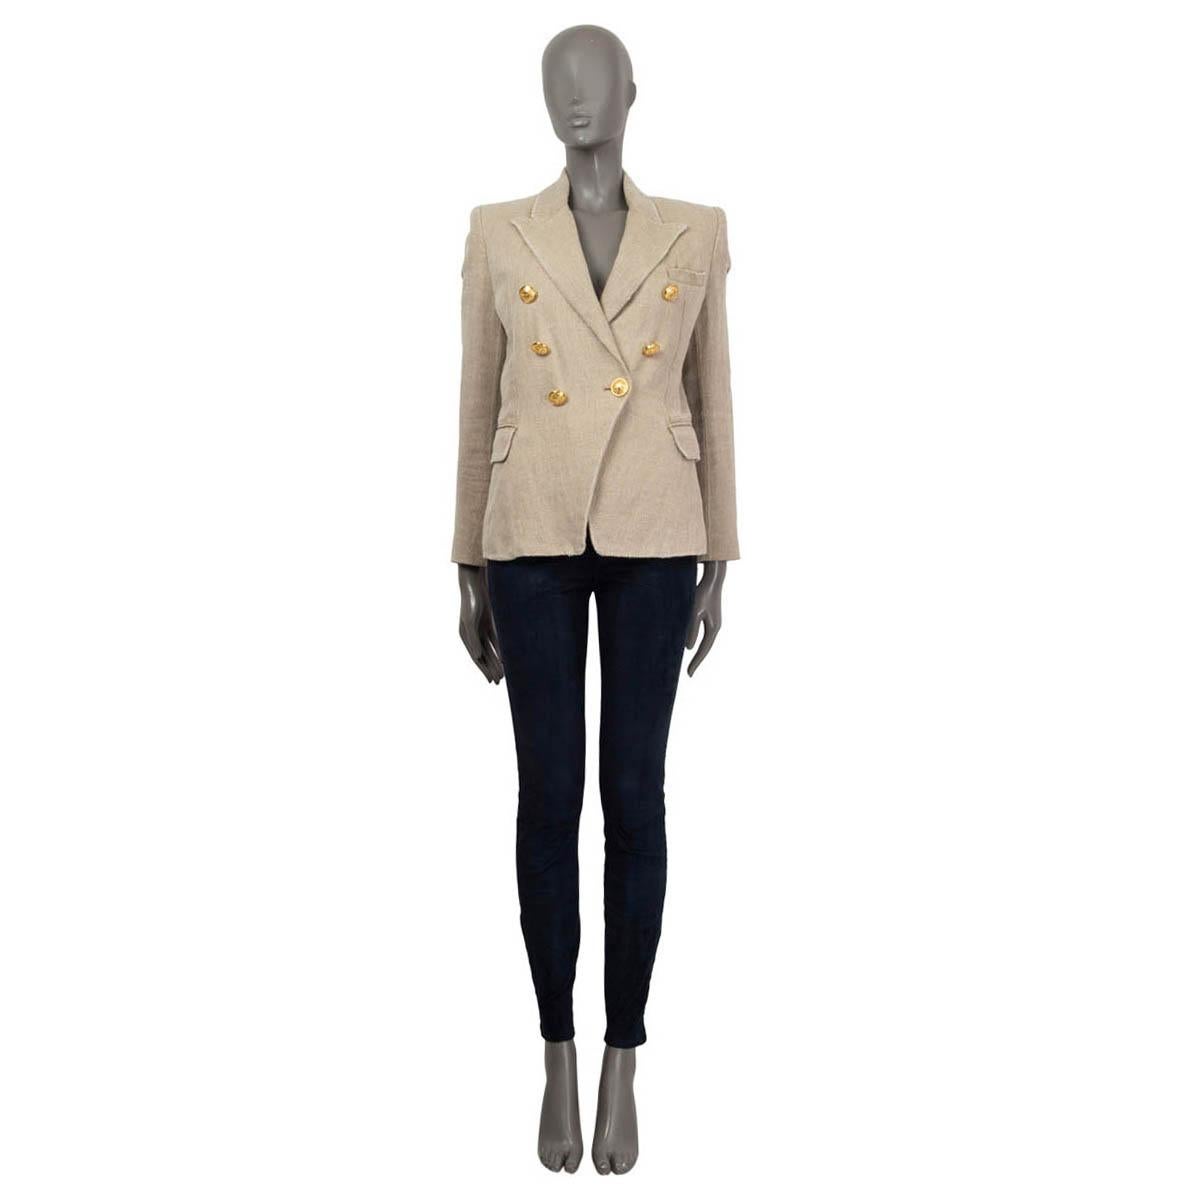 100% authentic Balmain double-breasted blazer in beige linen (100%). Features a chest pocket and two flap pockets on the sides. With padded shoulders and buttoned cuffs. Closes with signature lion-head buttons in gold-tone metal. Lined in black